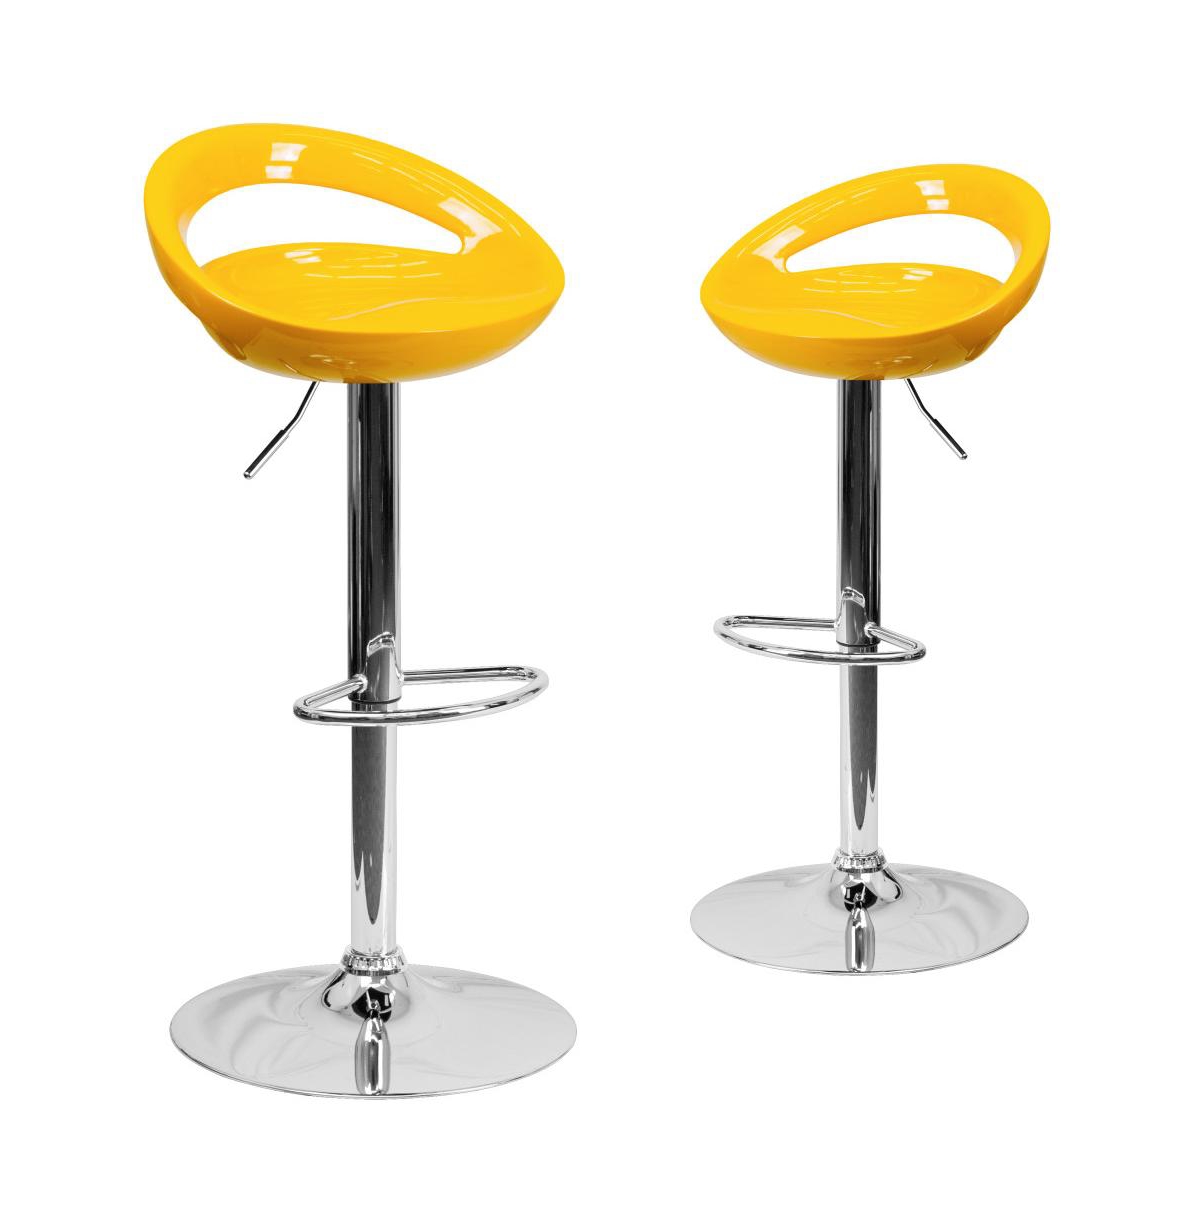 Emma+oliver 2 Pack Contemporary Plastic Adjustable Height Barstool With Rounded Cutout Back And Chrome Base In Yellow